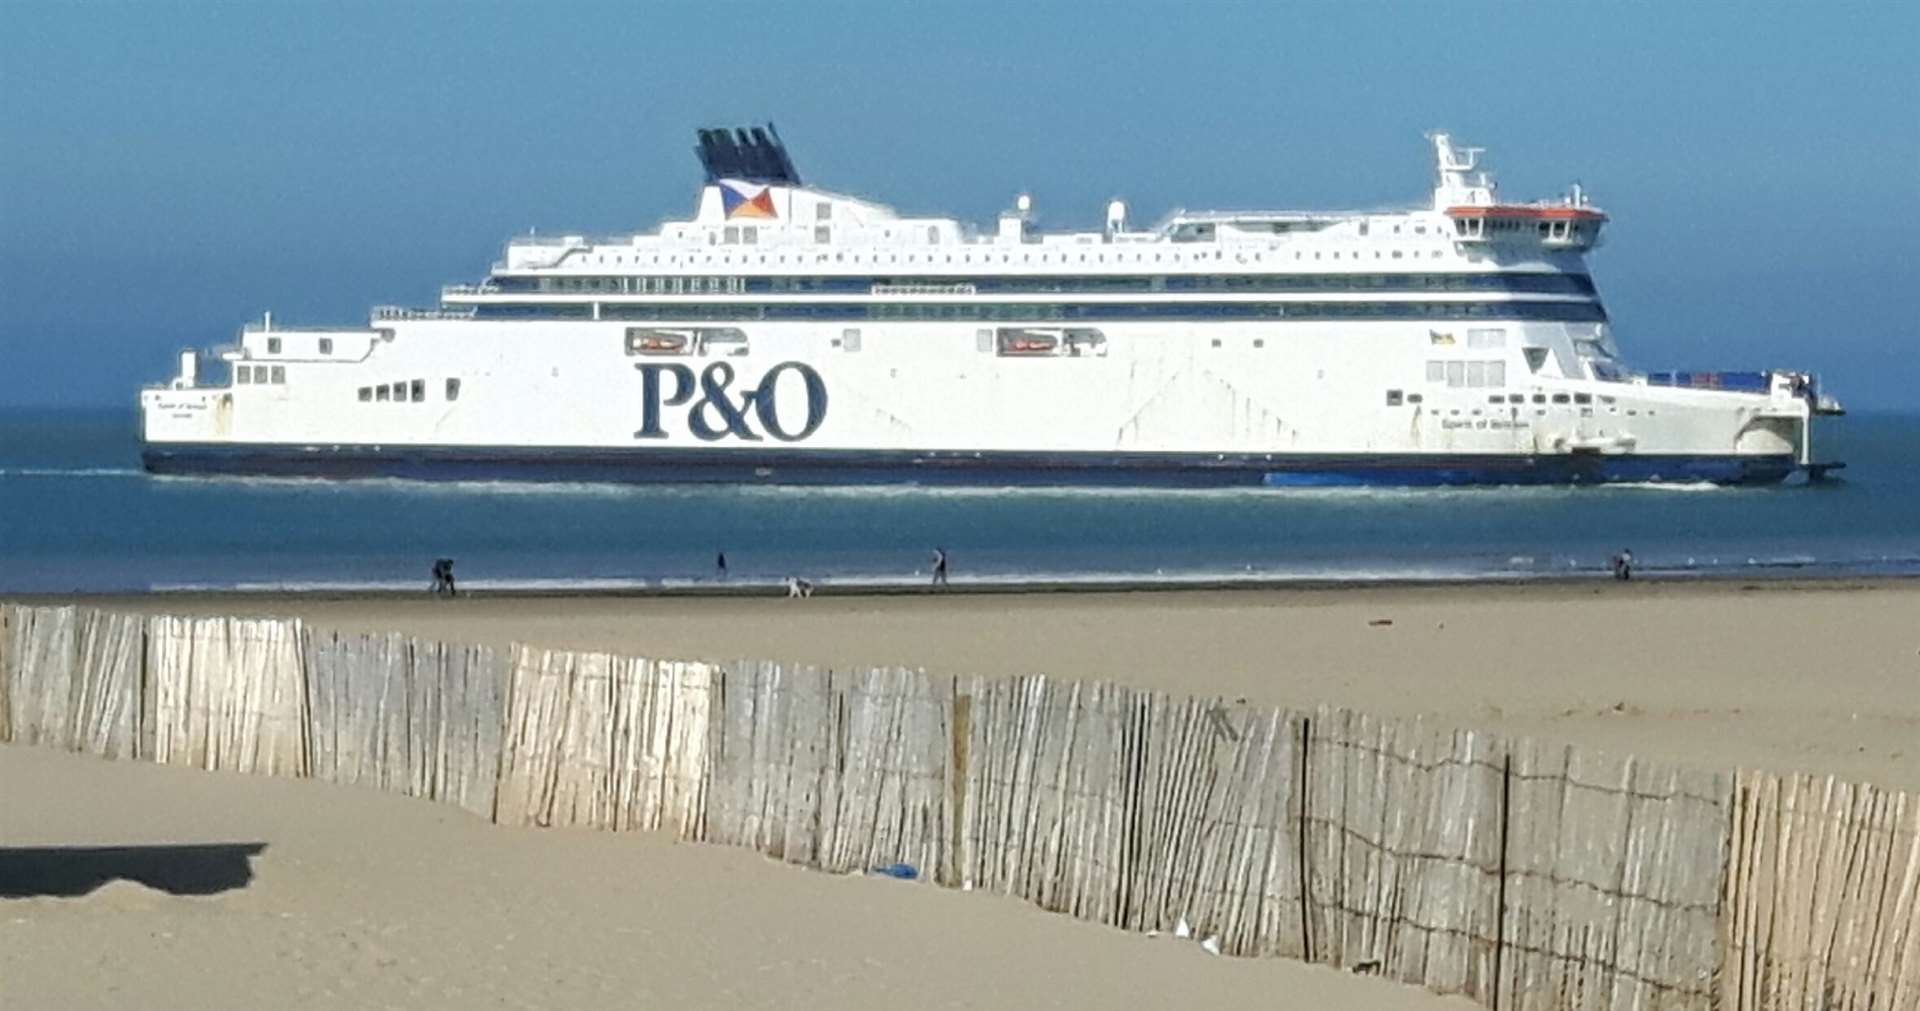 A P&O vessel arriving at Calais. Library image